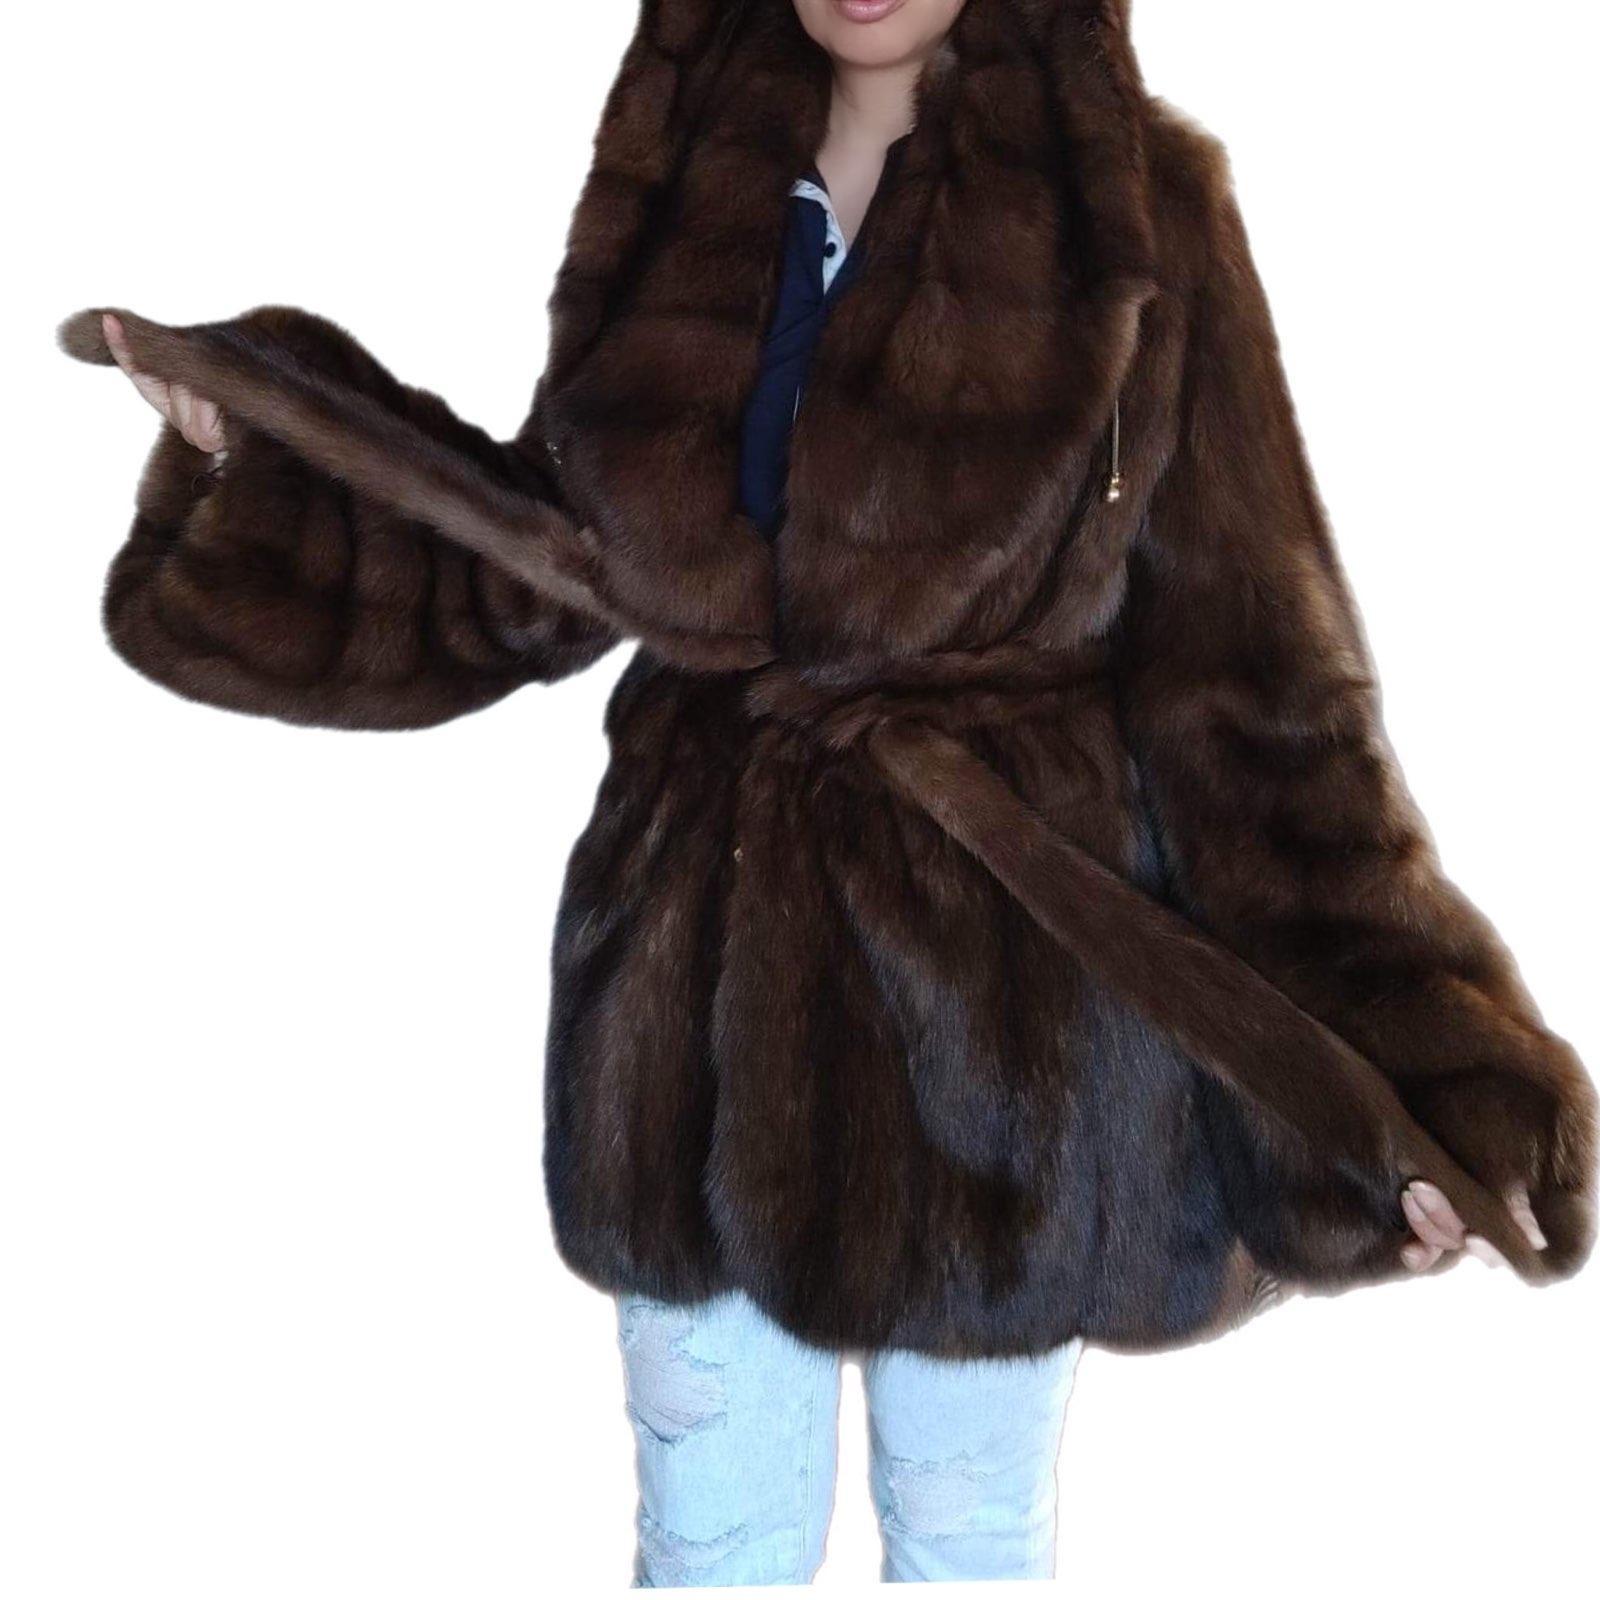 Christian Dior Russian Sable fur coat size 12 tags 55000$ For Sale 7